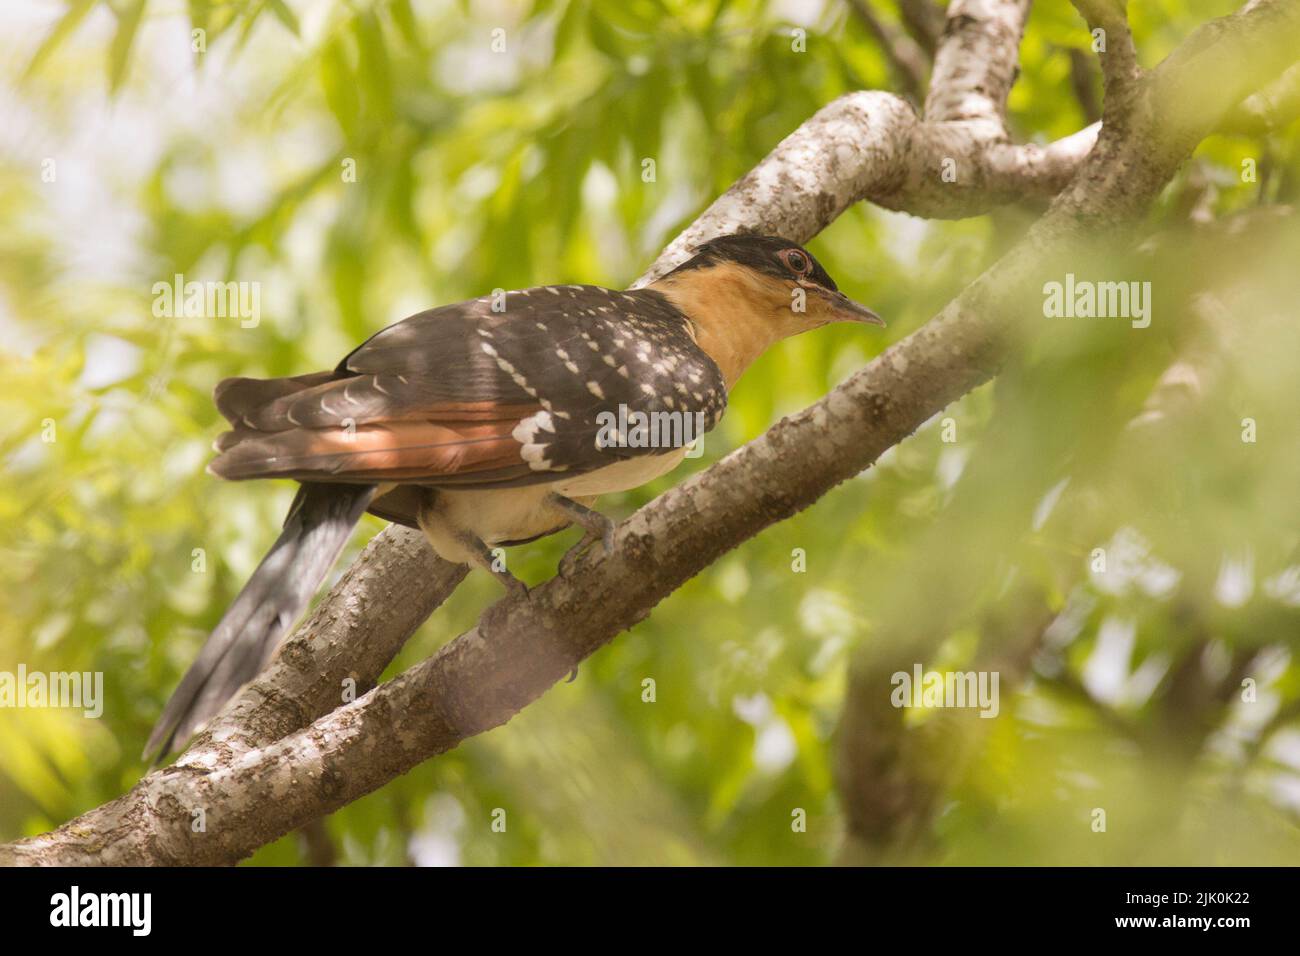 The great spotted cuckoo (Clamator glandarius) is a member of the cuckoo order of birds, the Cuculiformes, It is widely spread throughout Africa and t Stock Photo